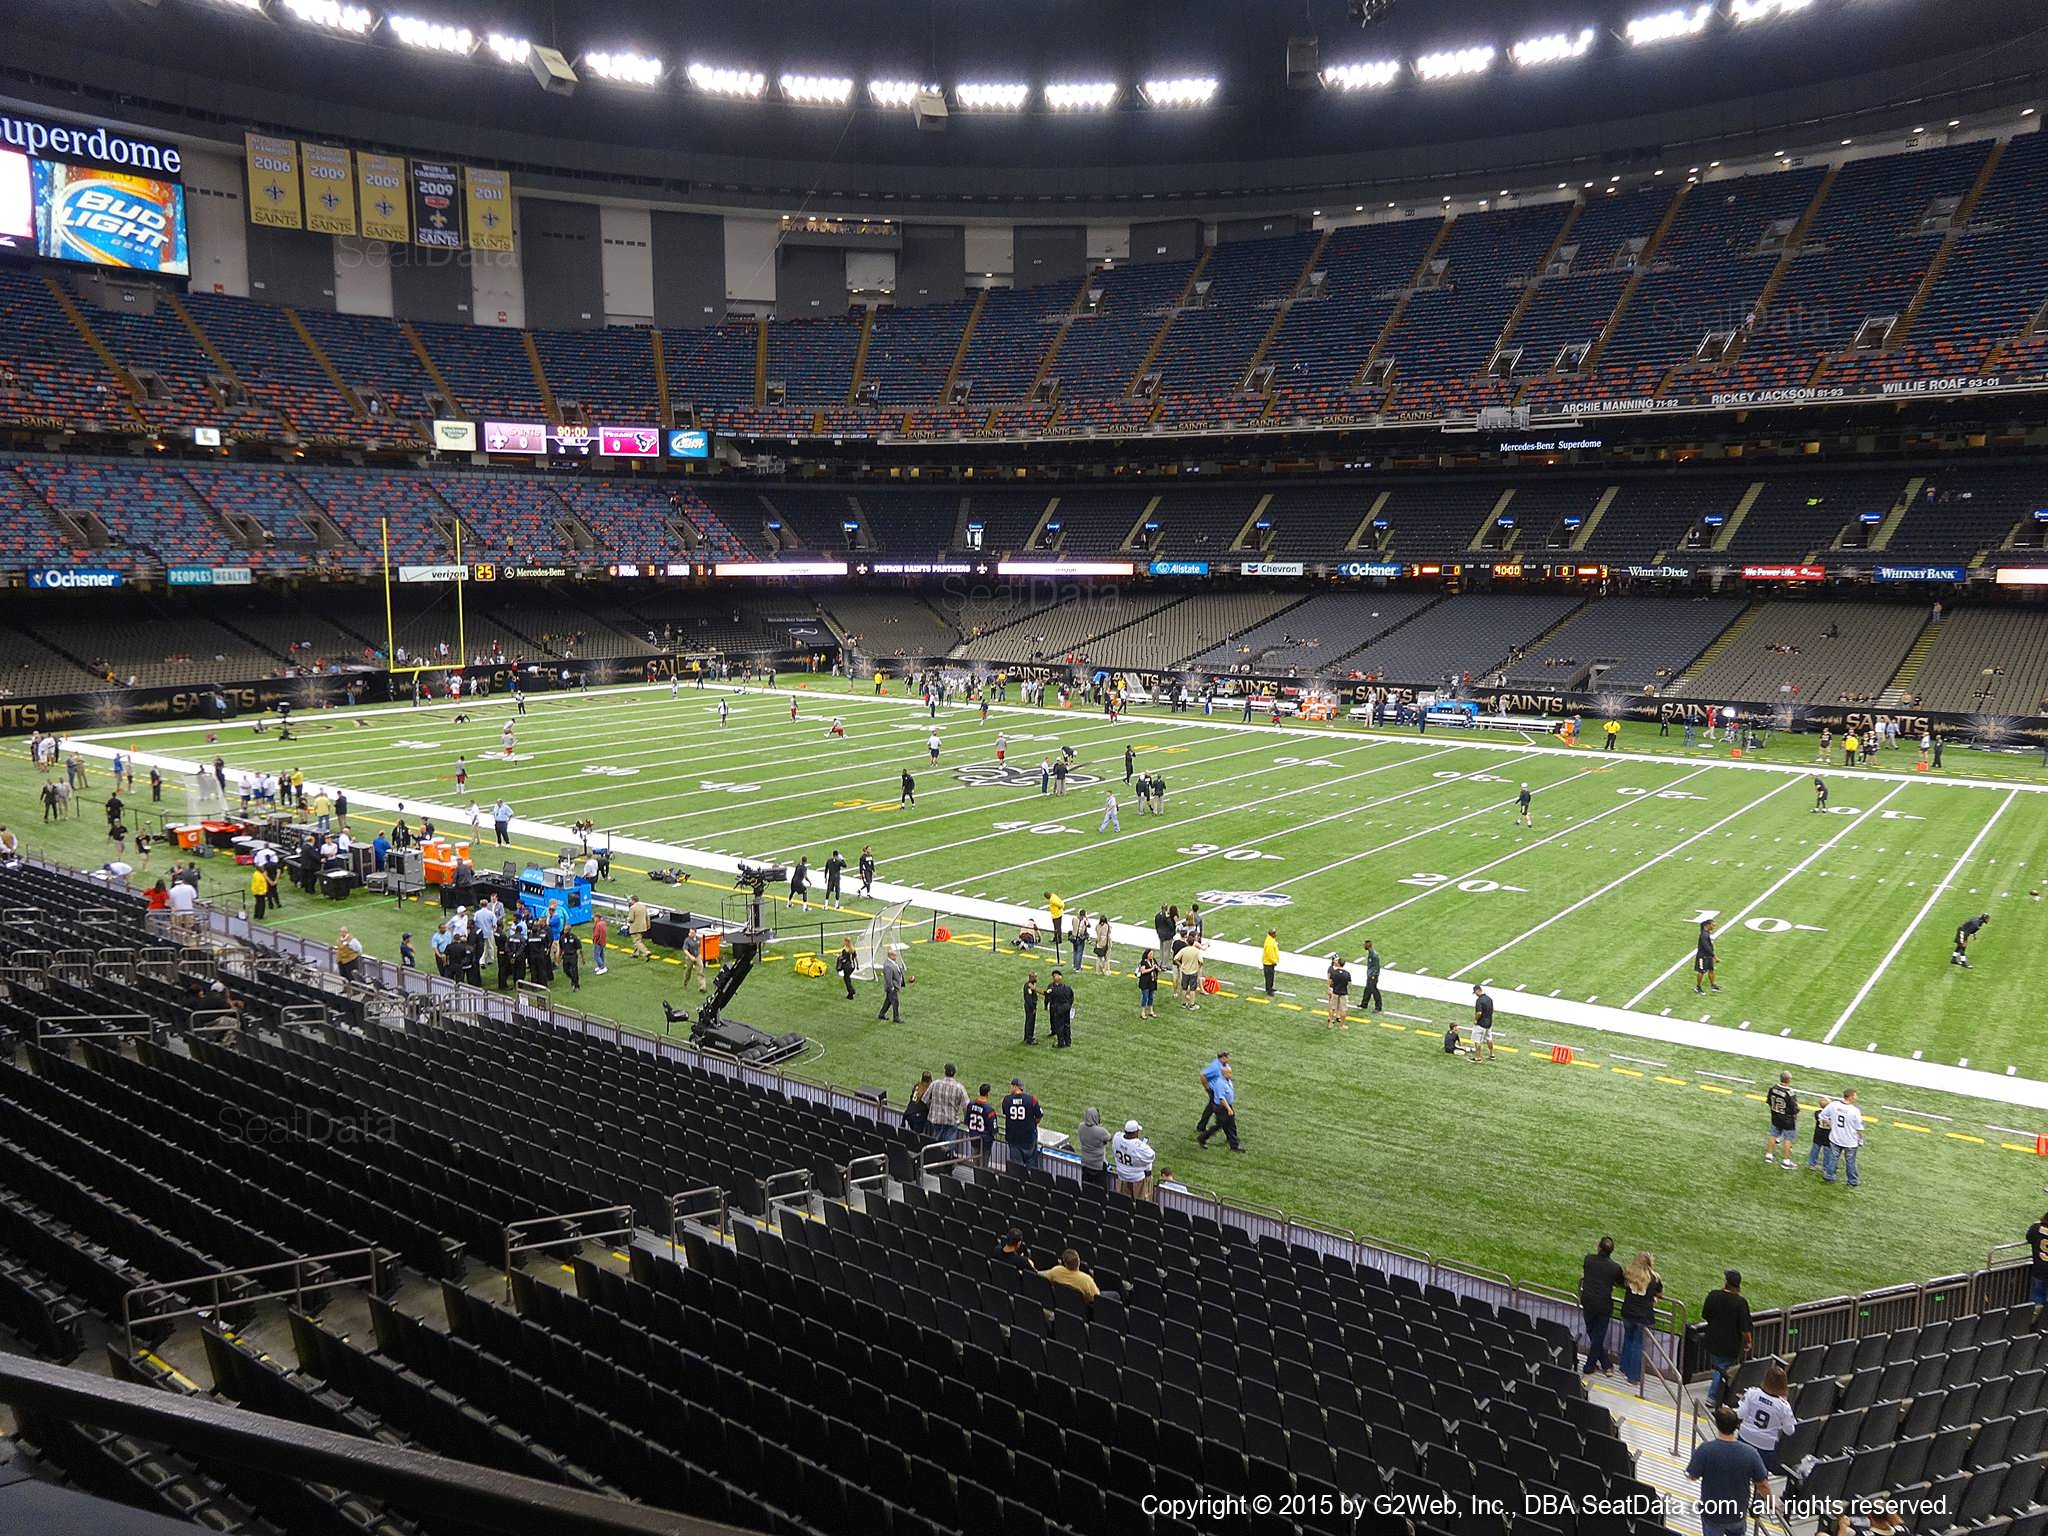 Seat view from section 255 at the Mercedes-Benz Superdome, home of the New Orleans Saints